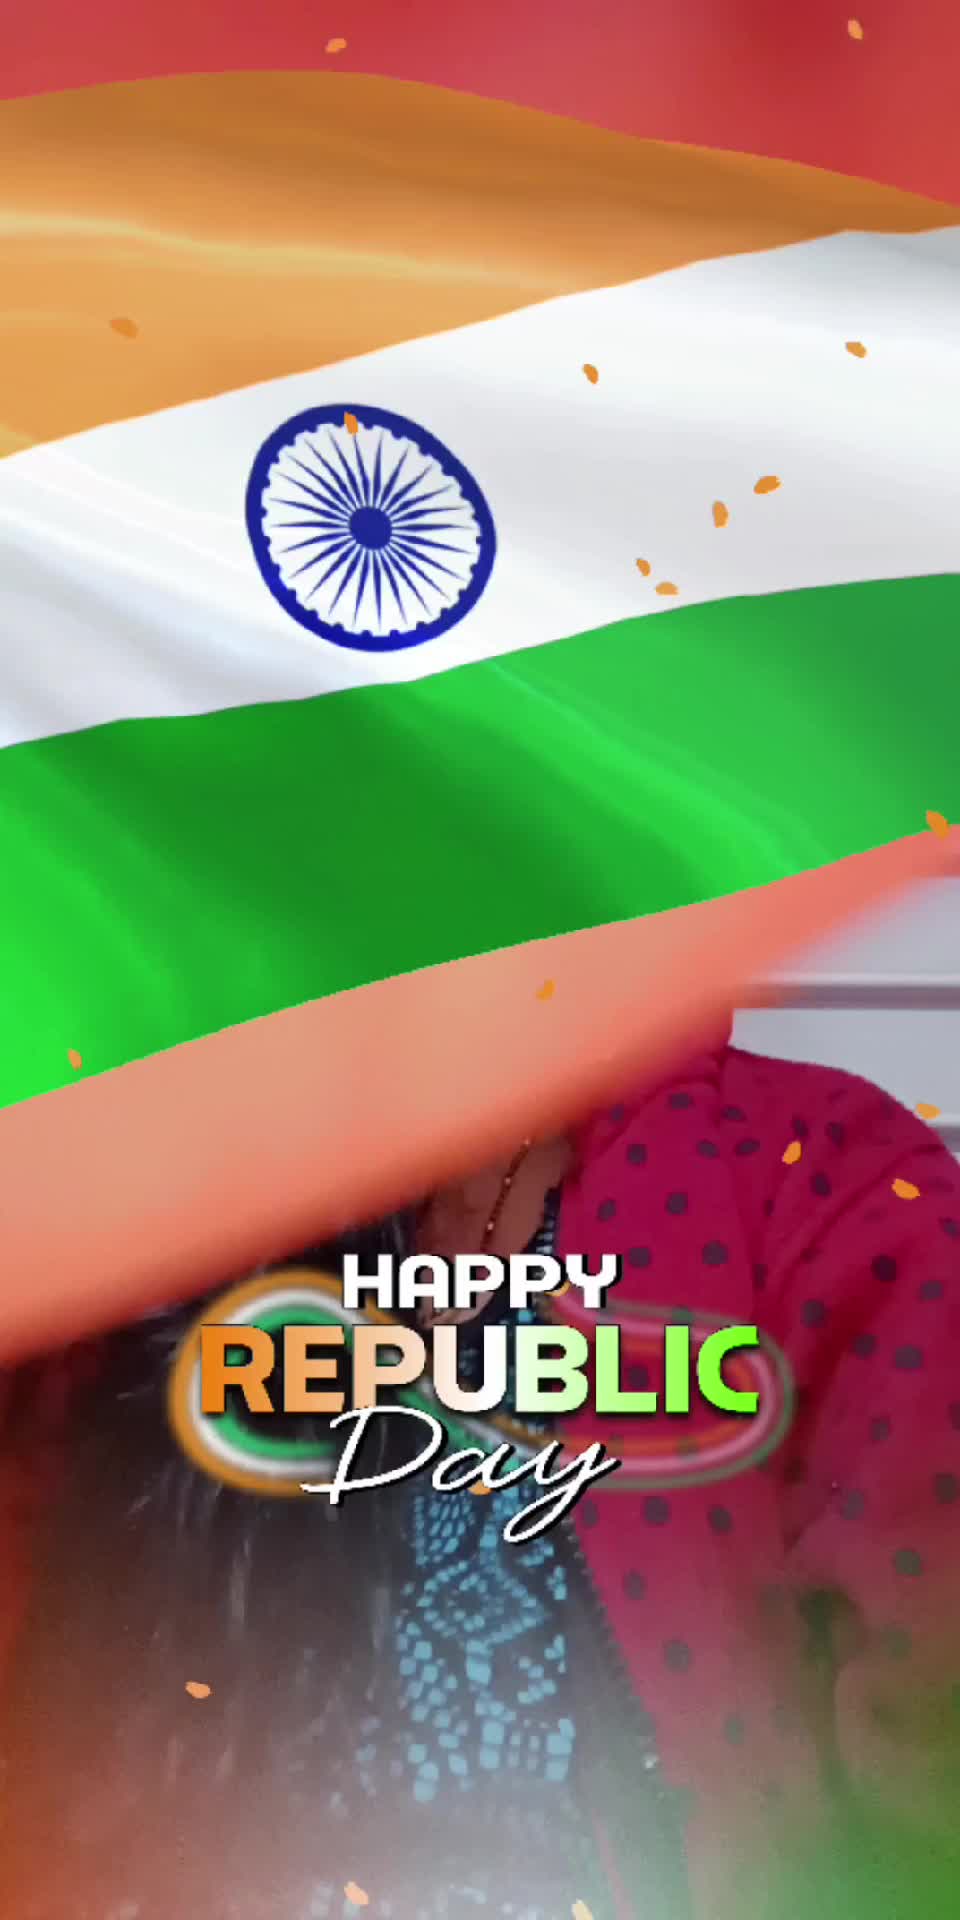 happy republic day to all of you ... #HappyRepublicDay #26january #freedom #lens #krithee_nair0812